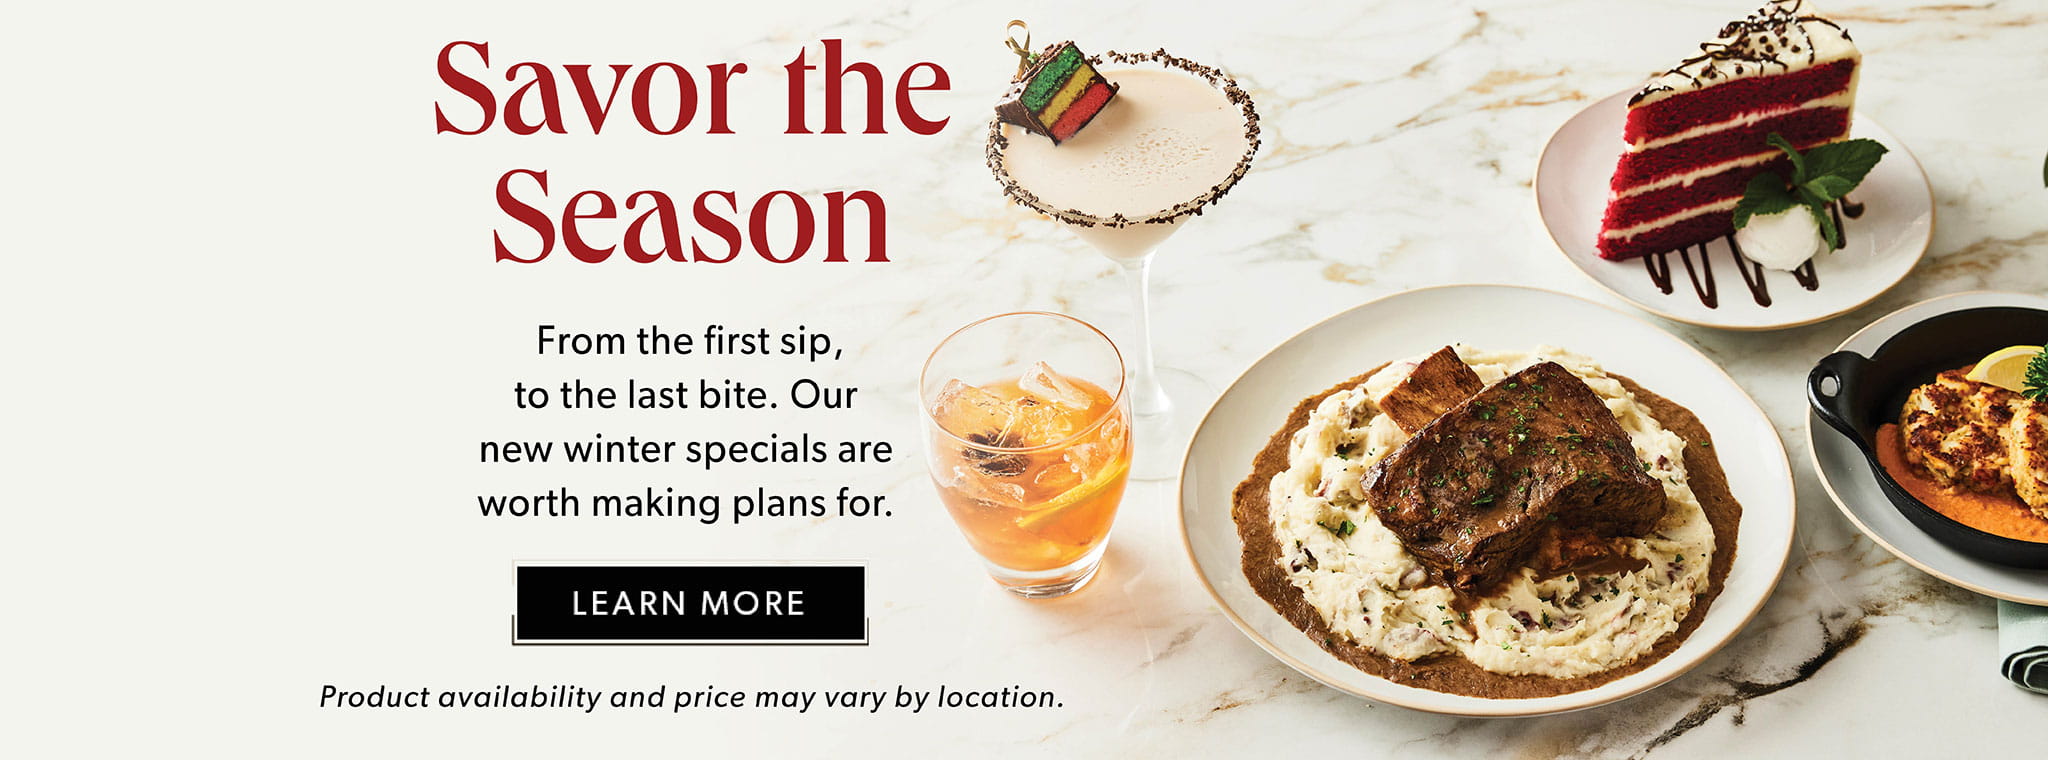 Savor the Season - From the first sip, to the last bite. Our new winter specials are worth making plans for.